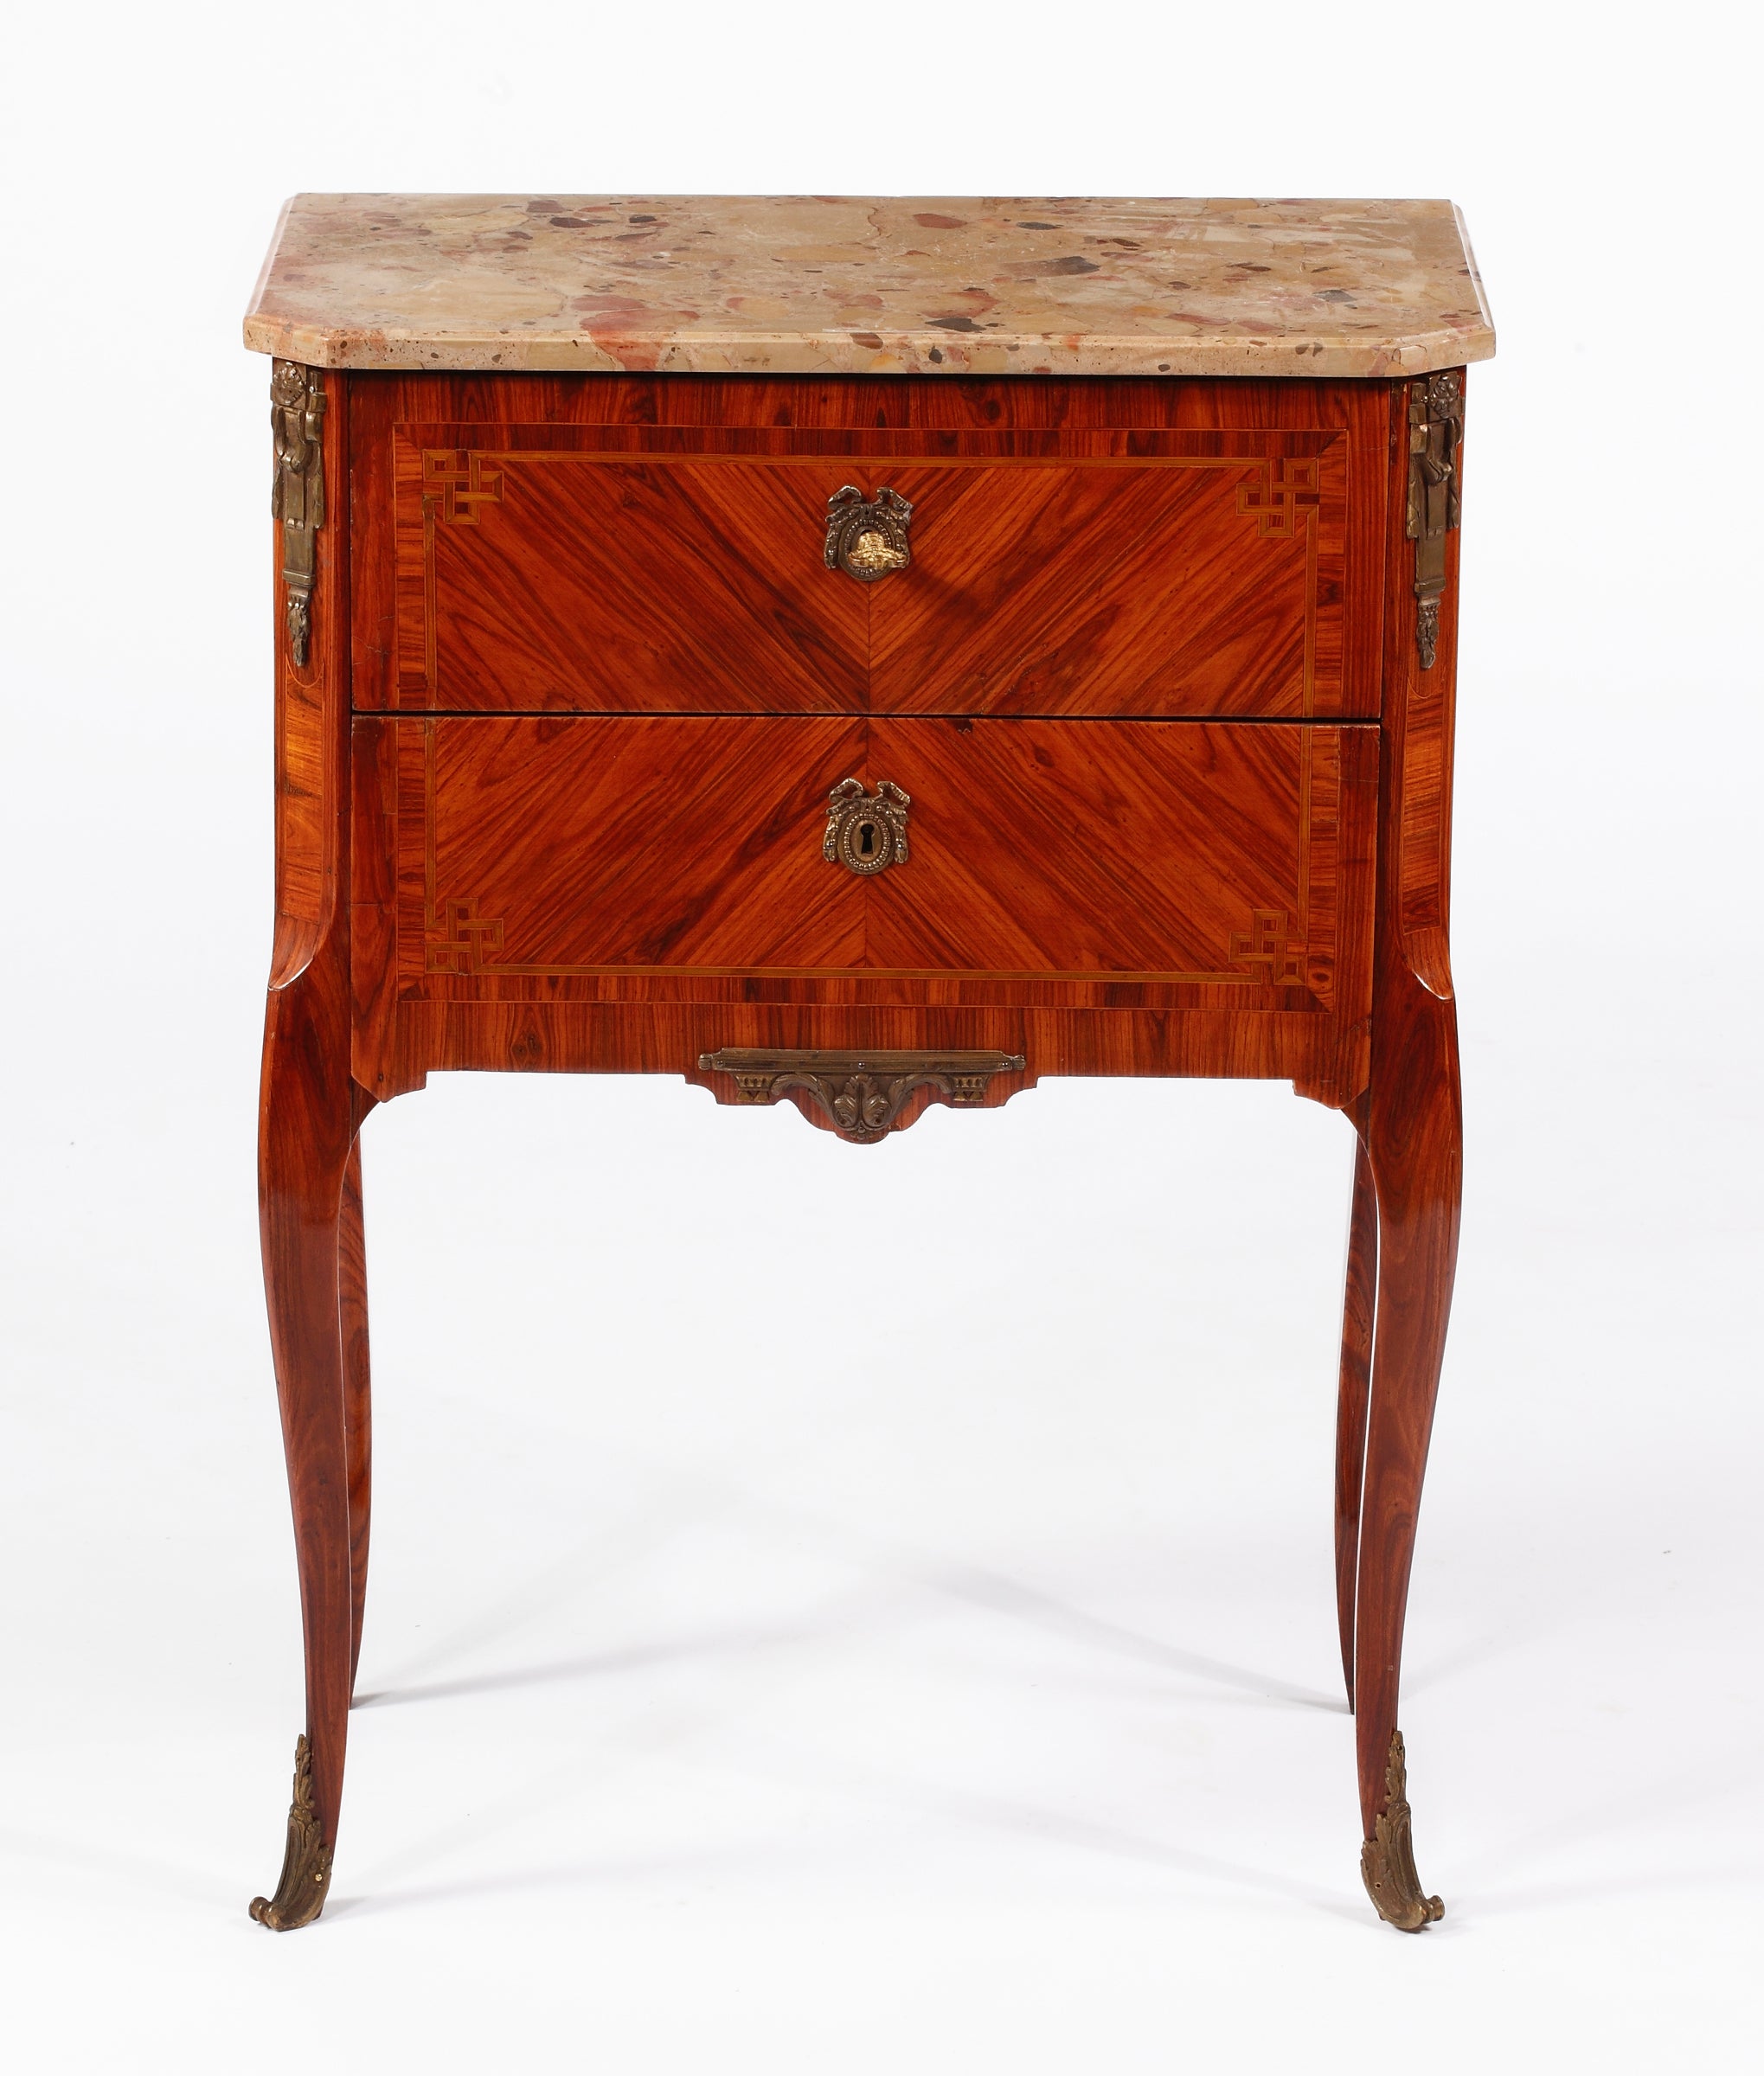 A French Ormulo-Mounted Petite Commode  By PAUL SORMANI For Sale